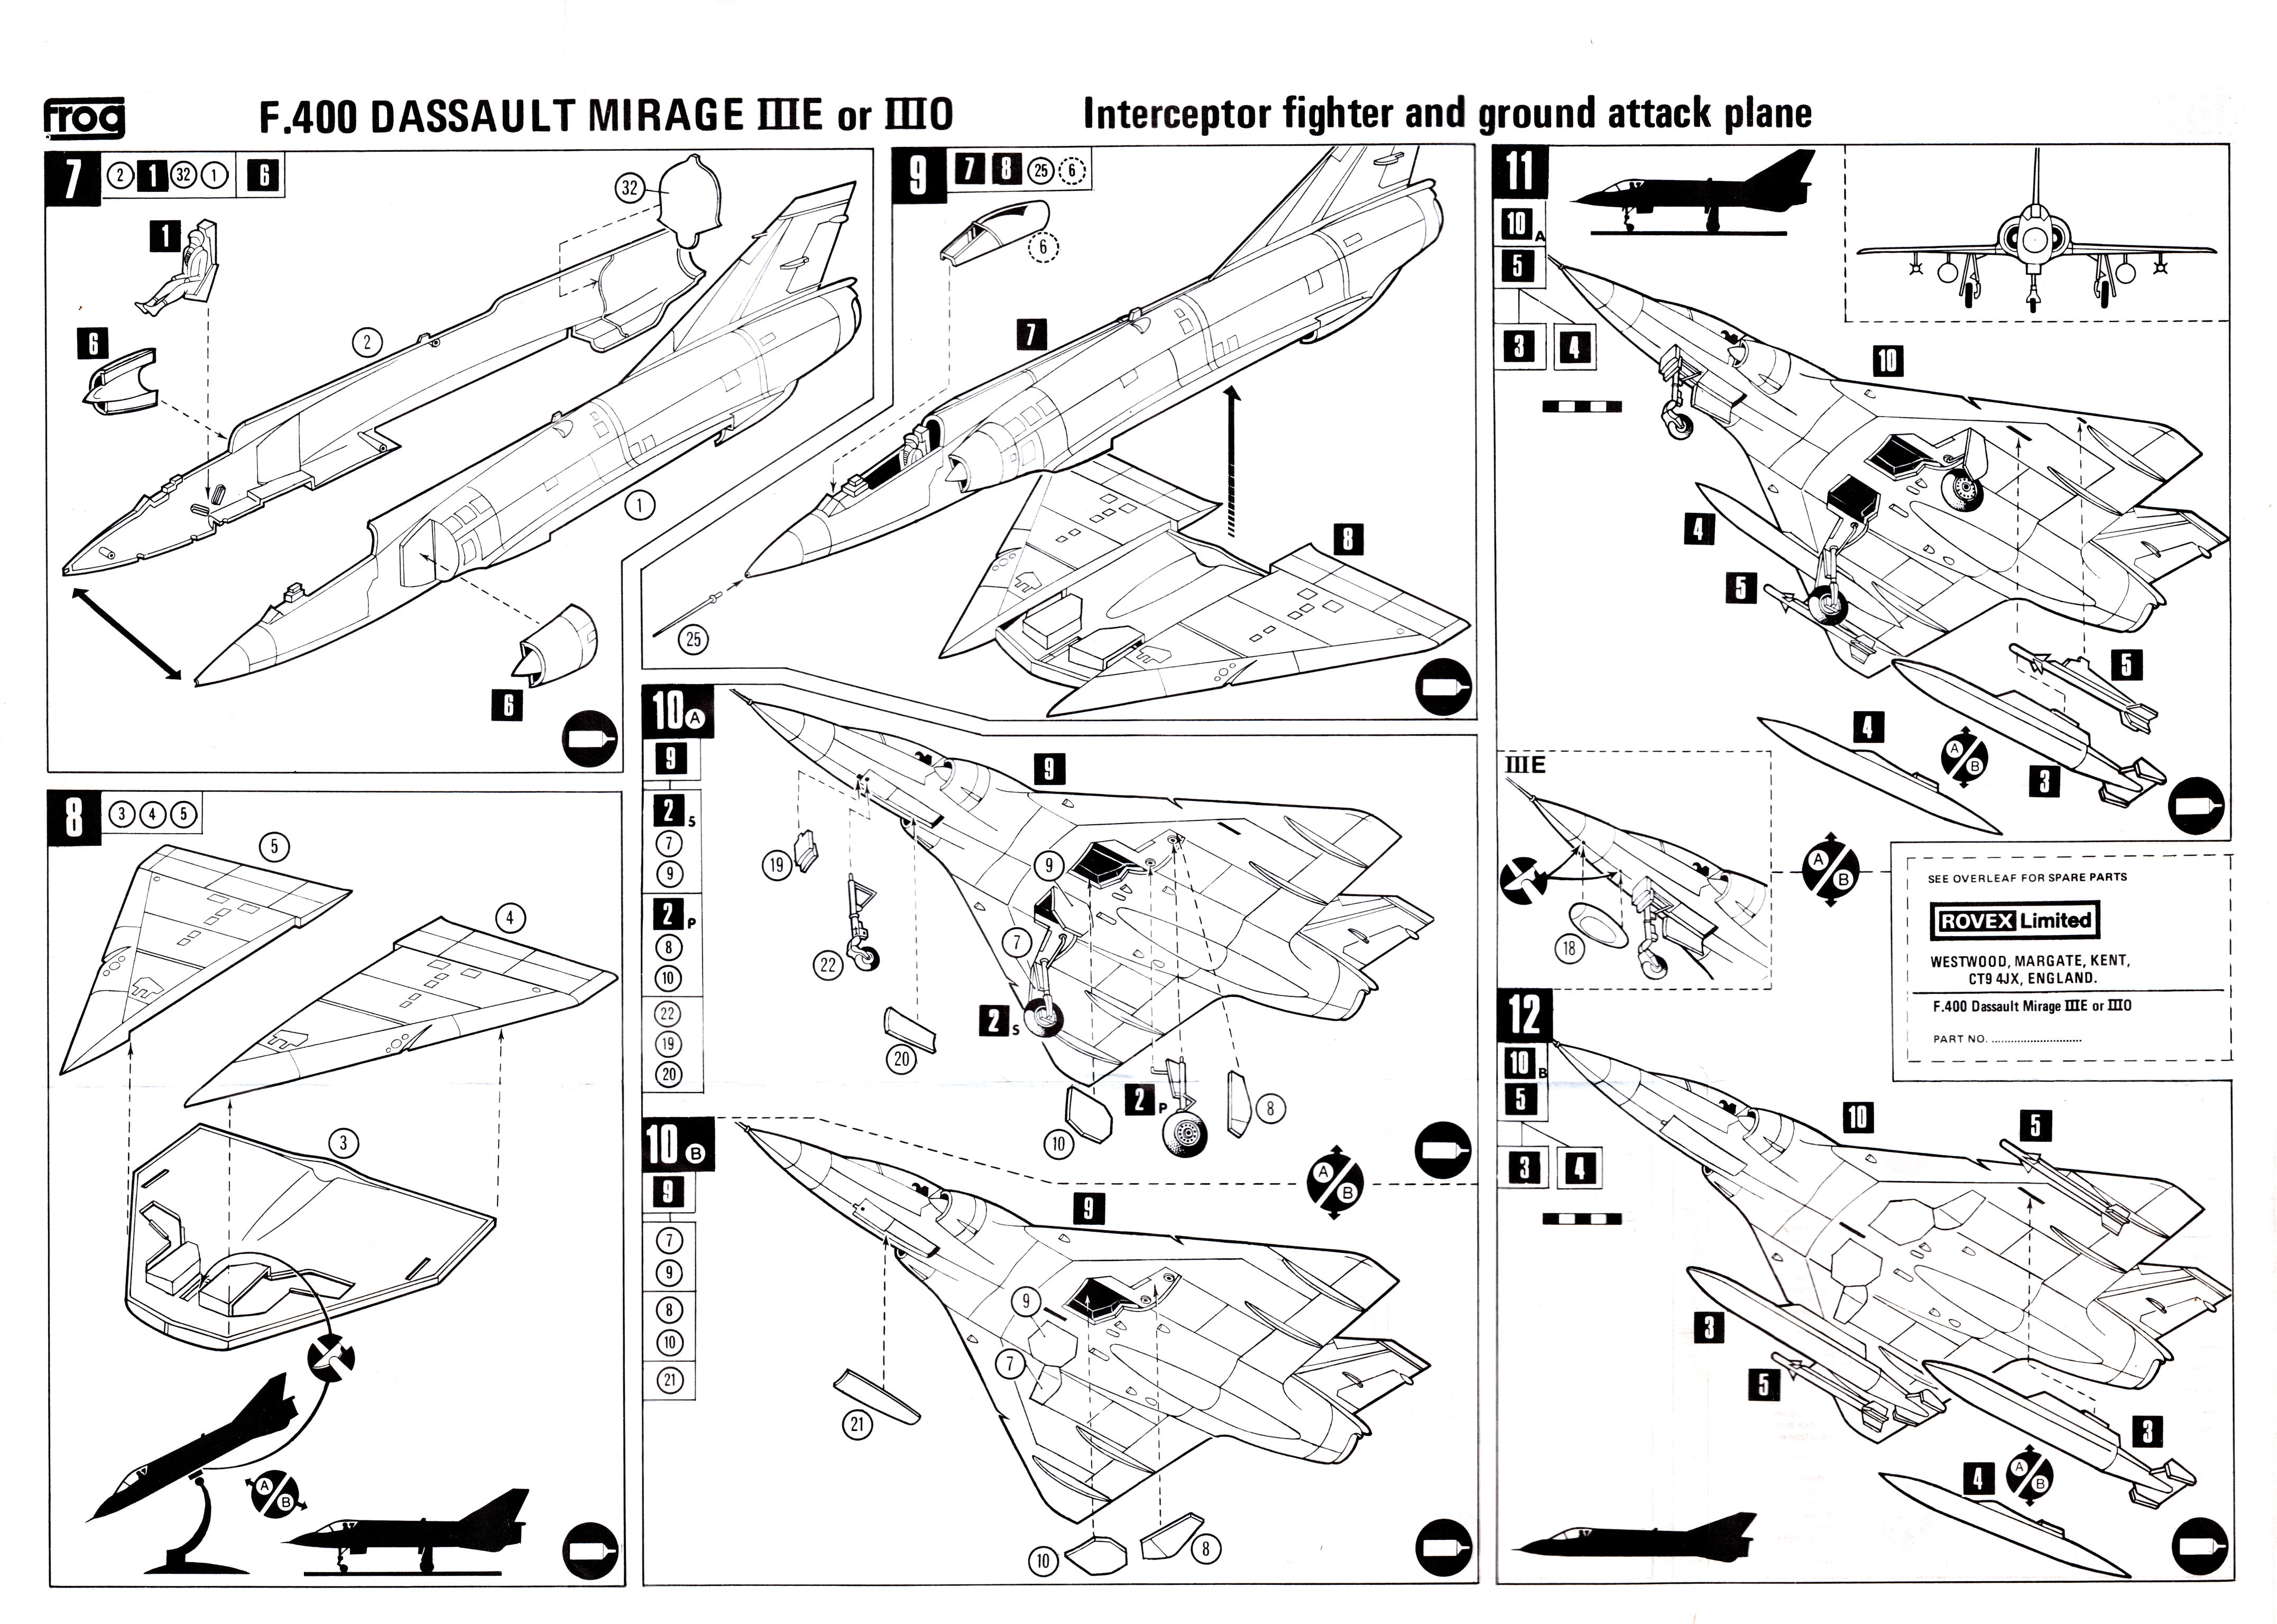 Assembly instructions FROG F400 Mirage IIIE/O Interceptor / Ground Attack, 1975